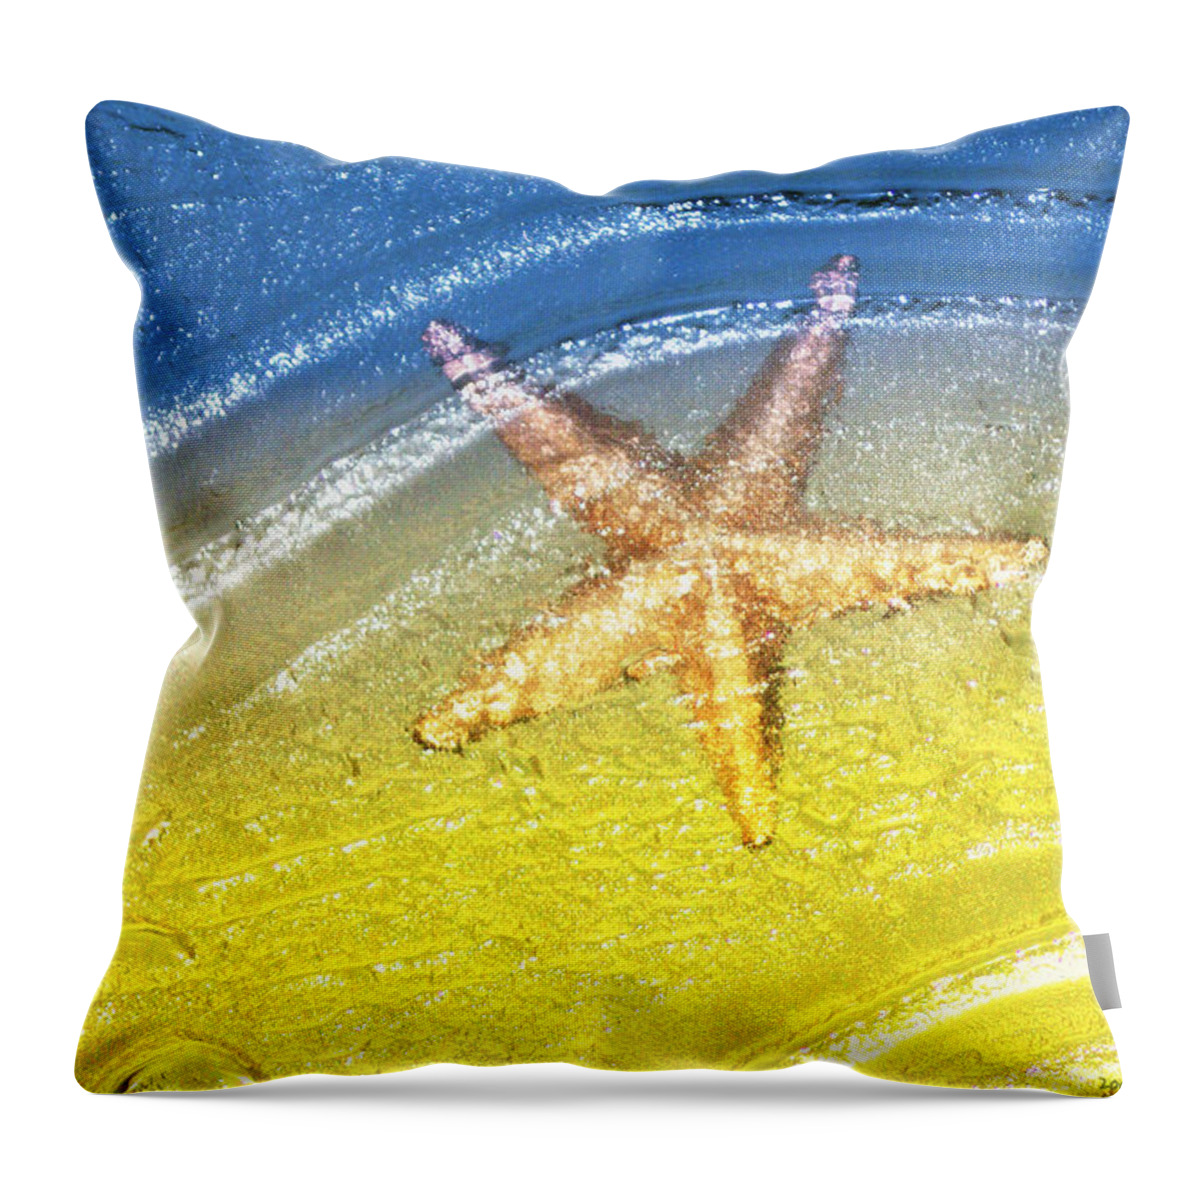 Starfish Throw Pillow featuring the photograph Going With the Flow by Holly Kempe